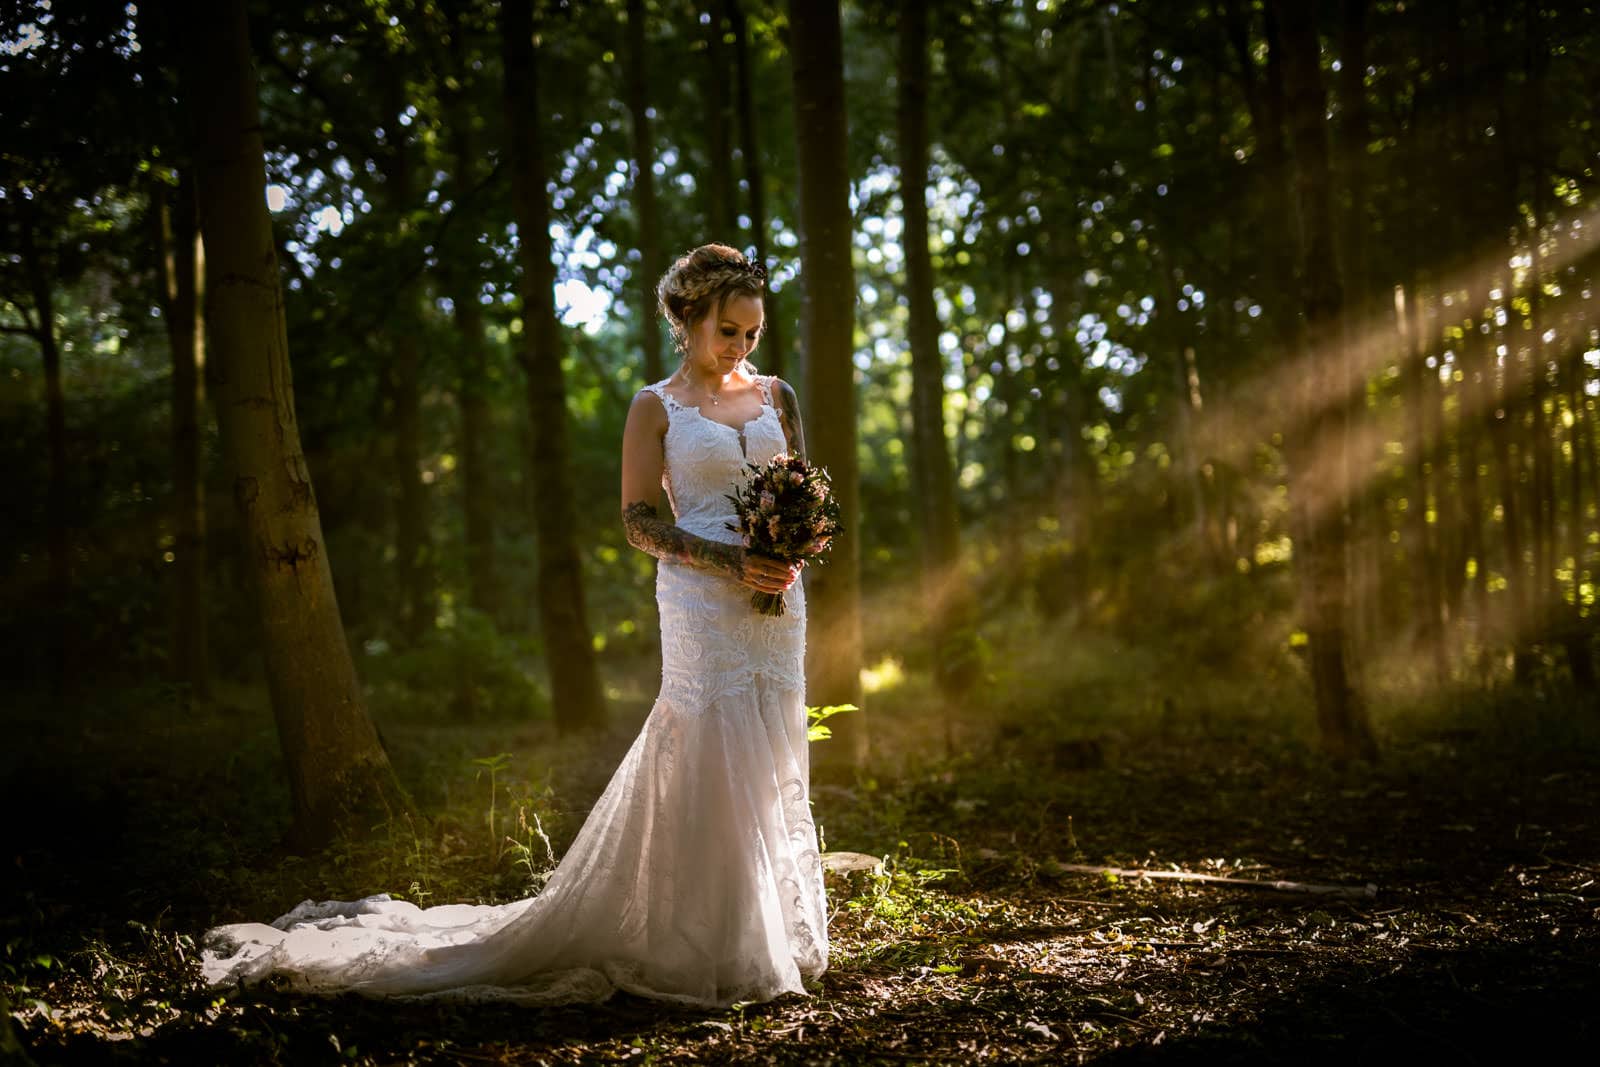 ethereal wedding photography of a bride in a forest